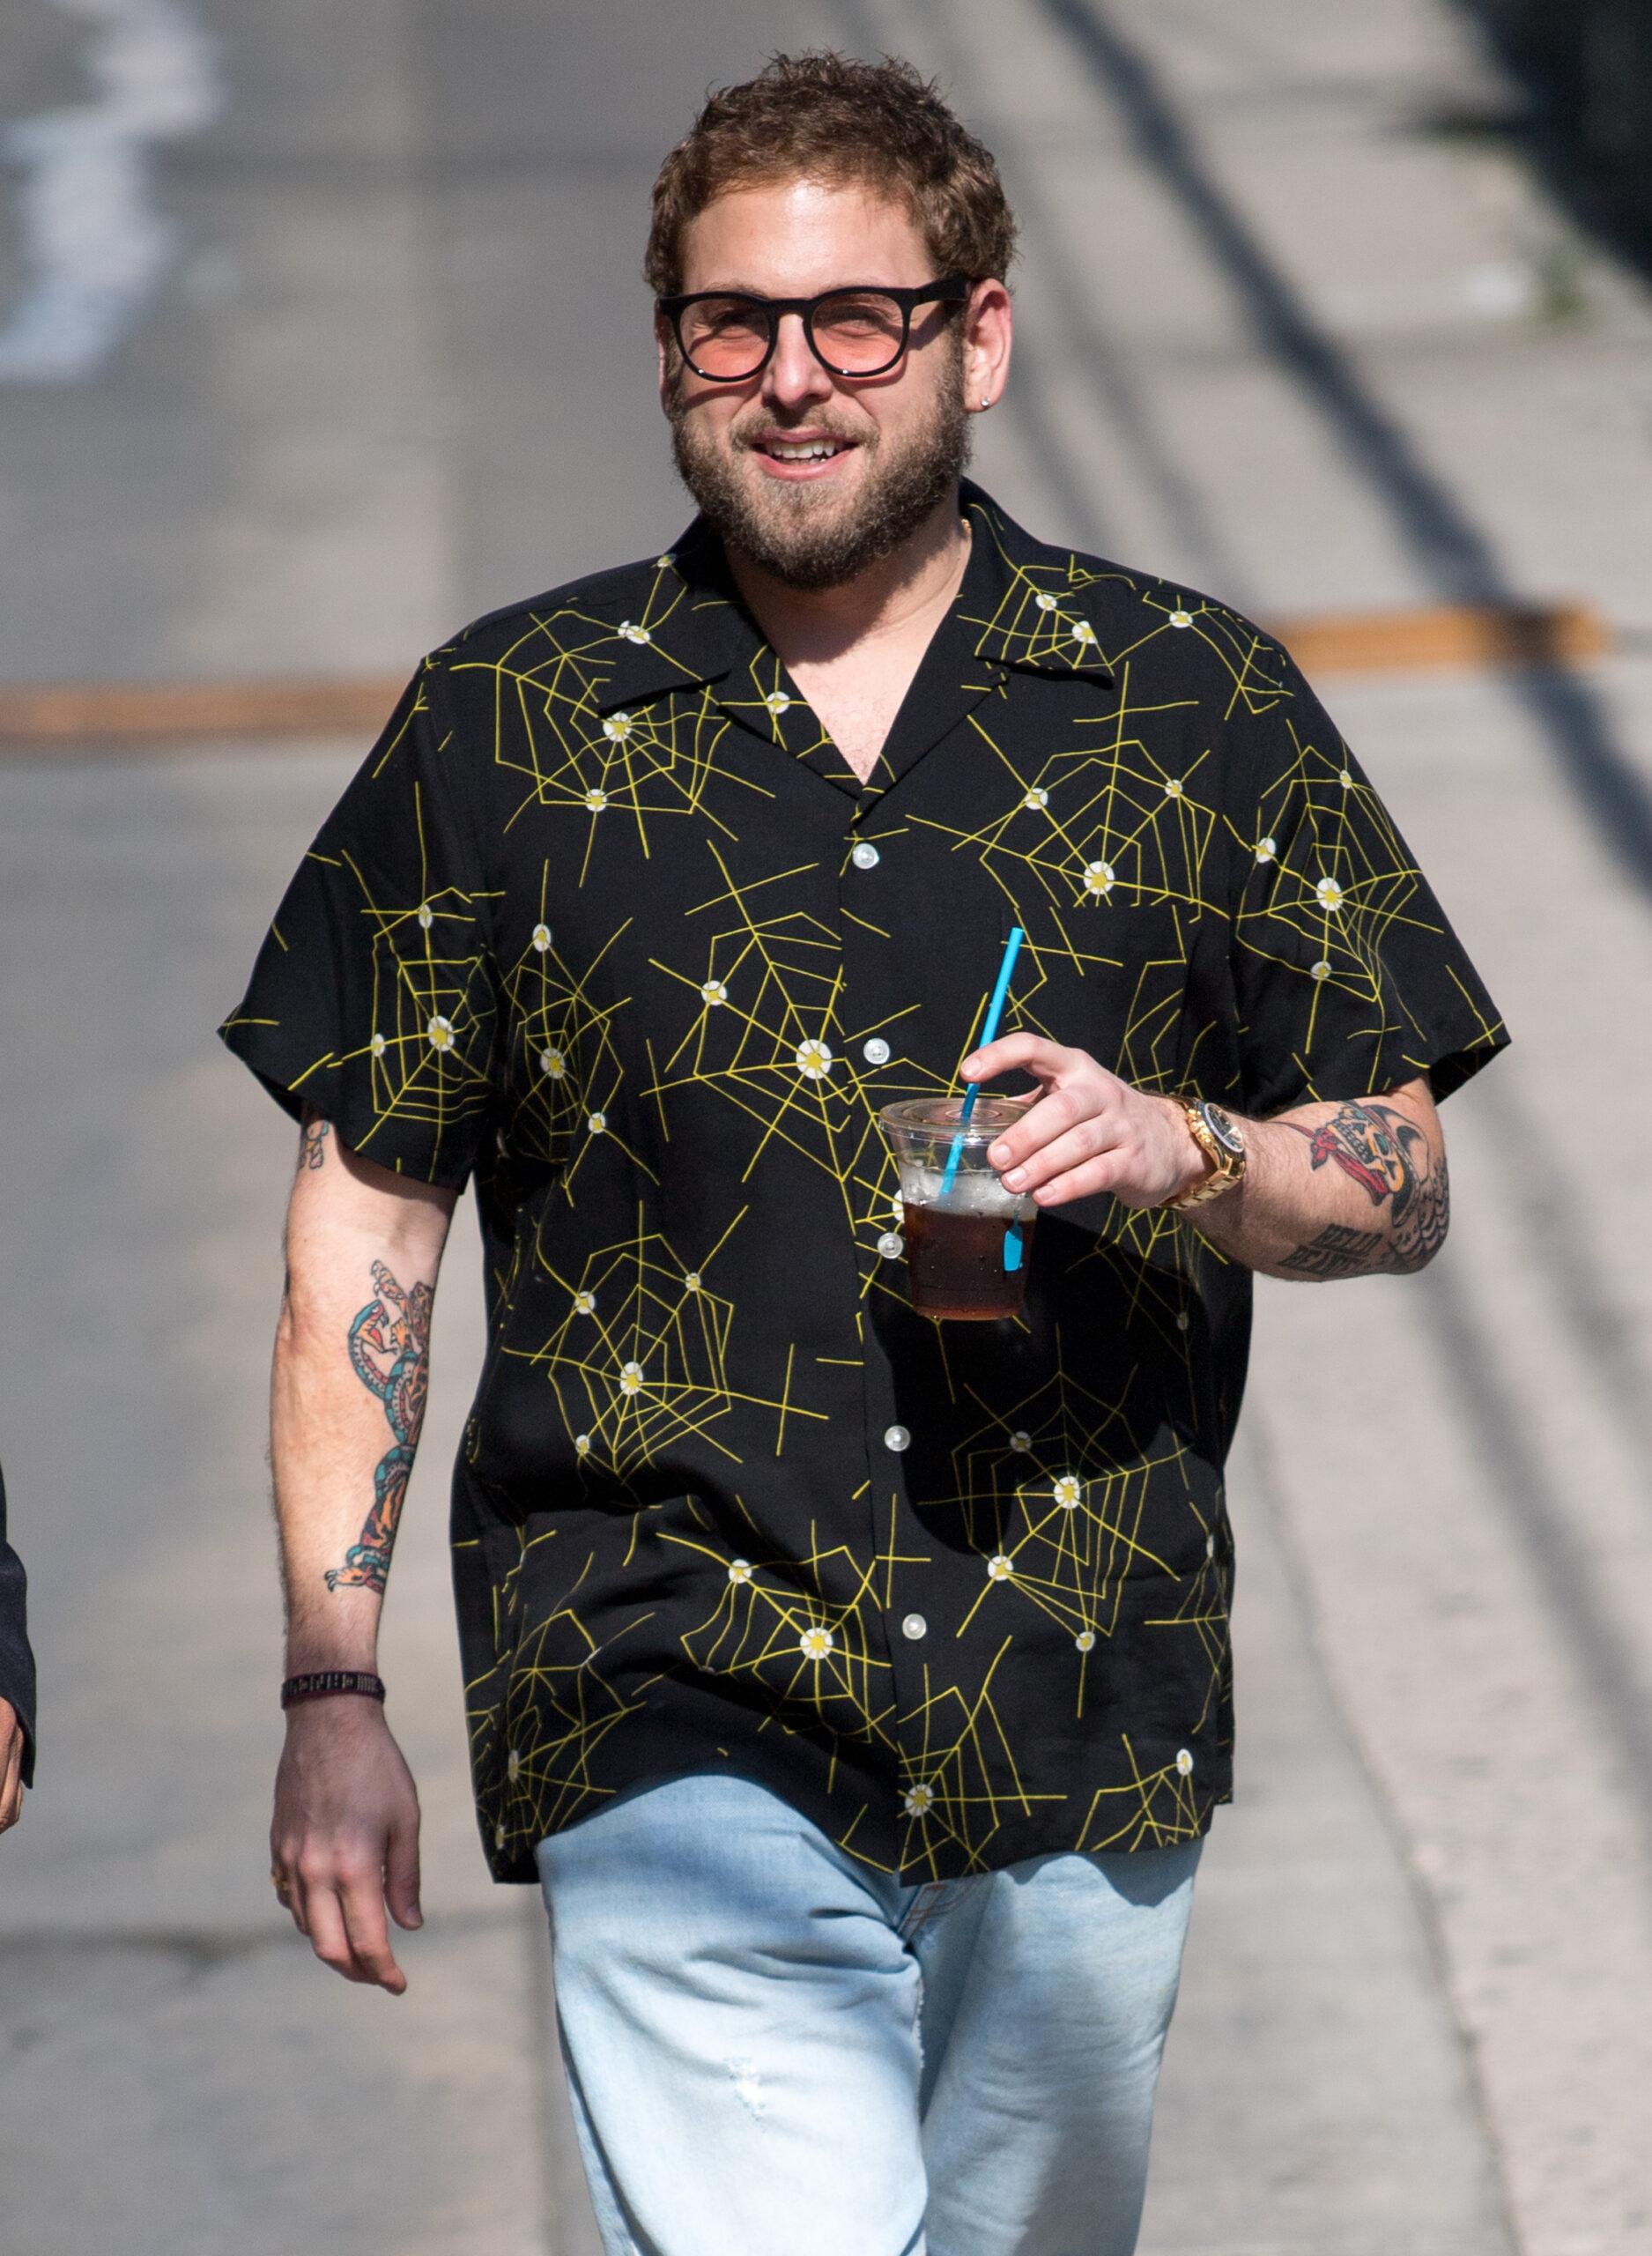 Jonah Hill at 'Jimmy Kimmel Live' in a black T-shirt with yellow designs and a blue pant.